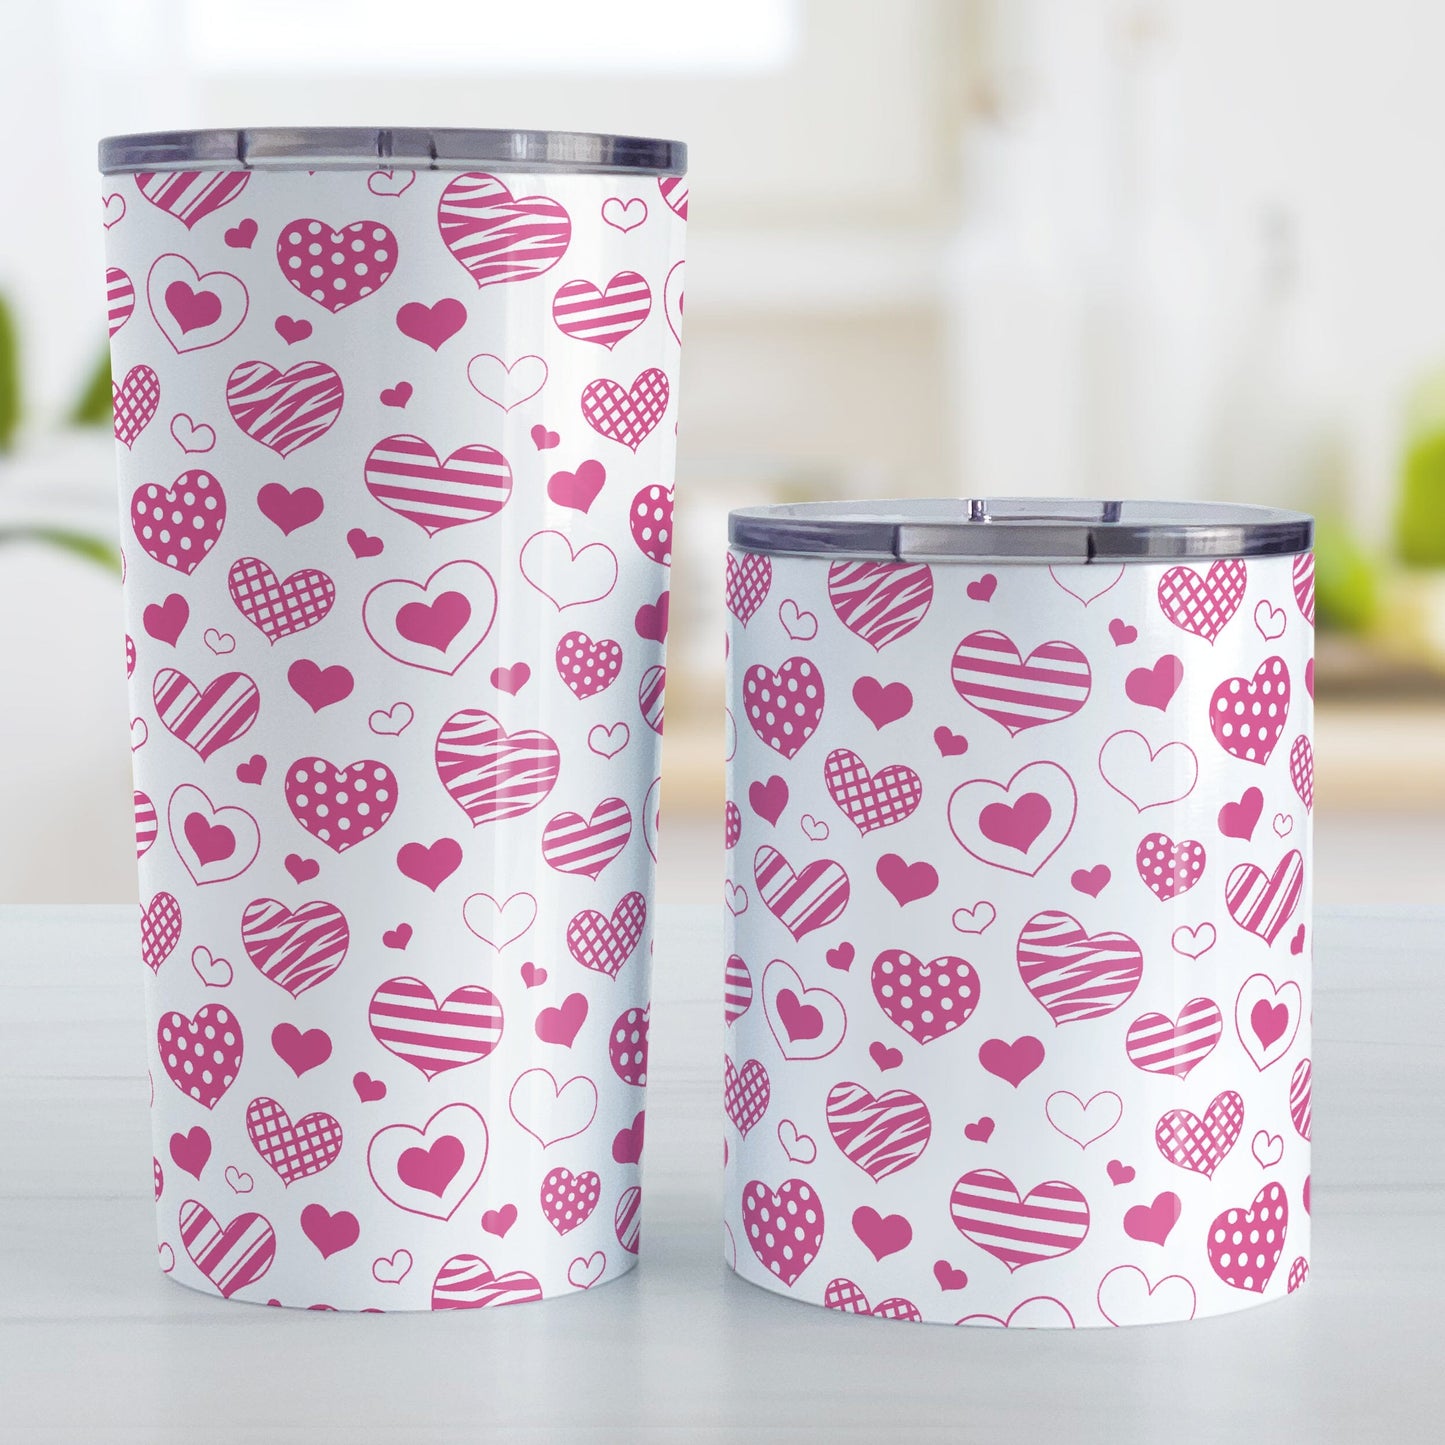 Pink Heart Doodles Tumbler Cup (20oz or 10oz) at Amy's Coffee Mugs. Stainless steel tumbler cups designed with hand-drawn pink heart doodles in a pattern that wraps around the cups. This cute heart pattern is perfect for Valentine's Day or for anyone who loves hearts and young-at-heart drawings. 